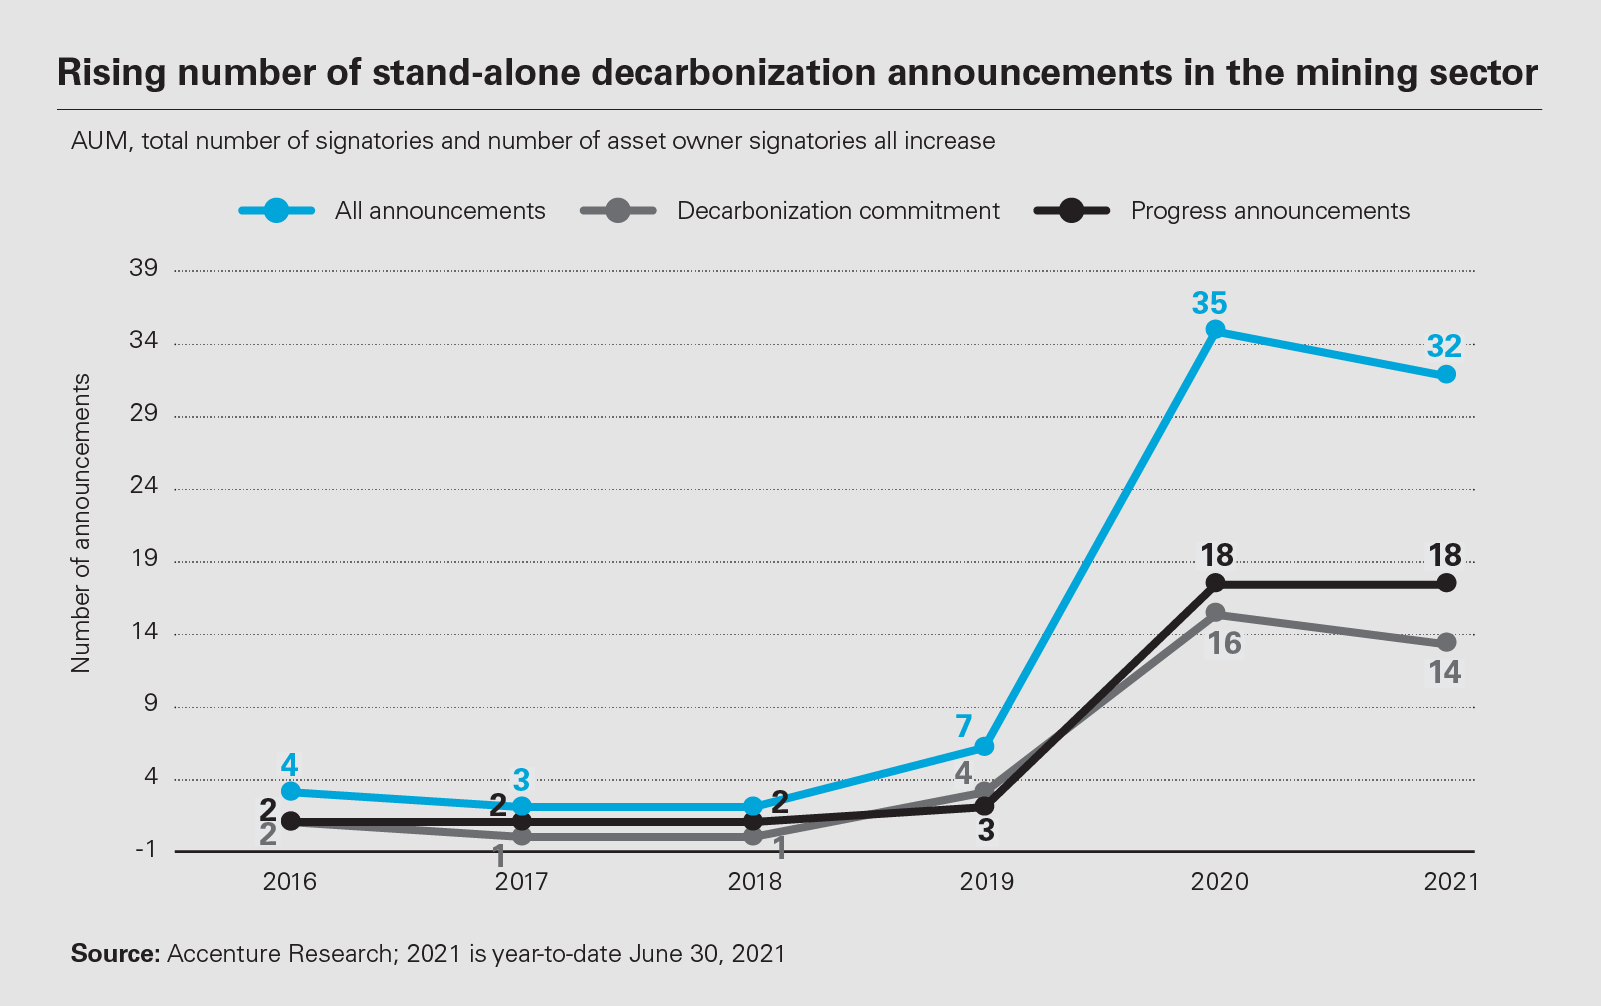 Rising number of stand-alone decarbonization announcements in the mining sector